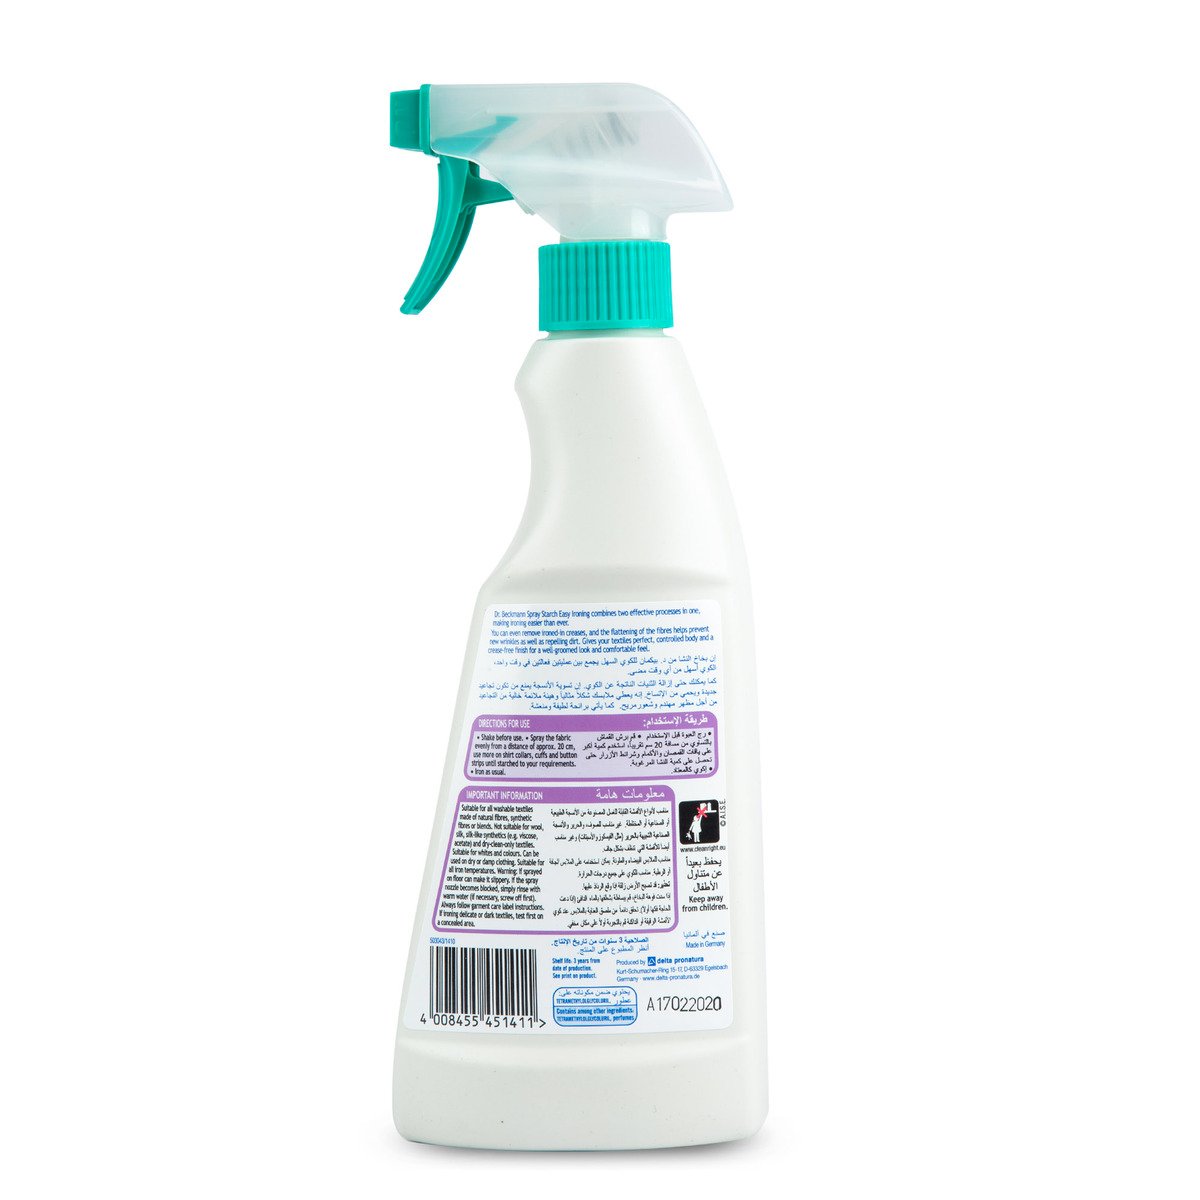 Easy on Ironing Spray Starch Effective Heavy Duty Spray Starch for